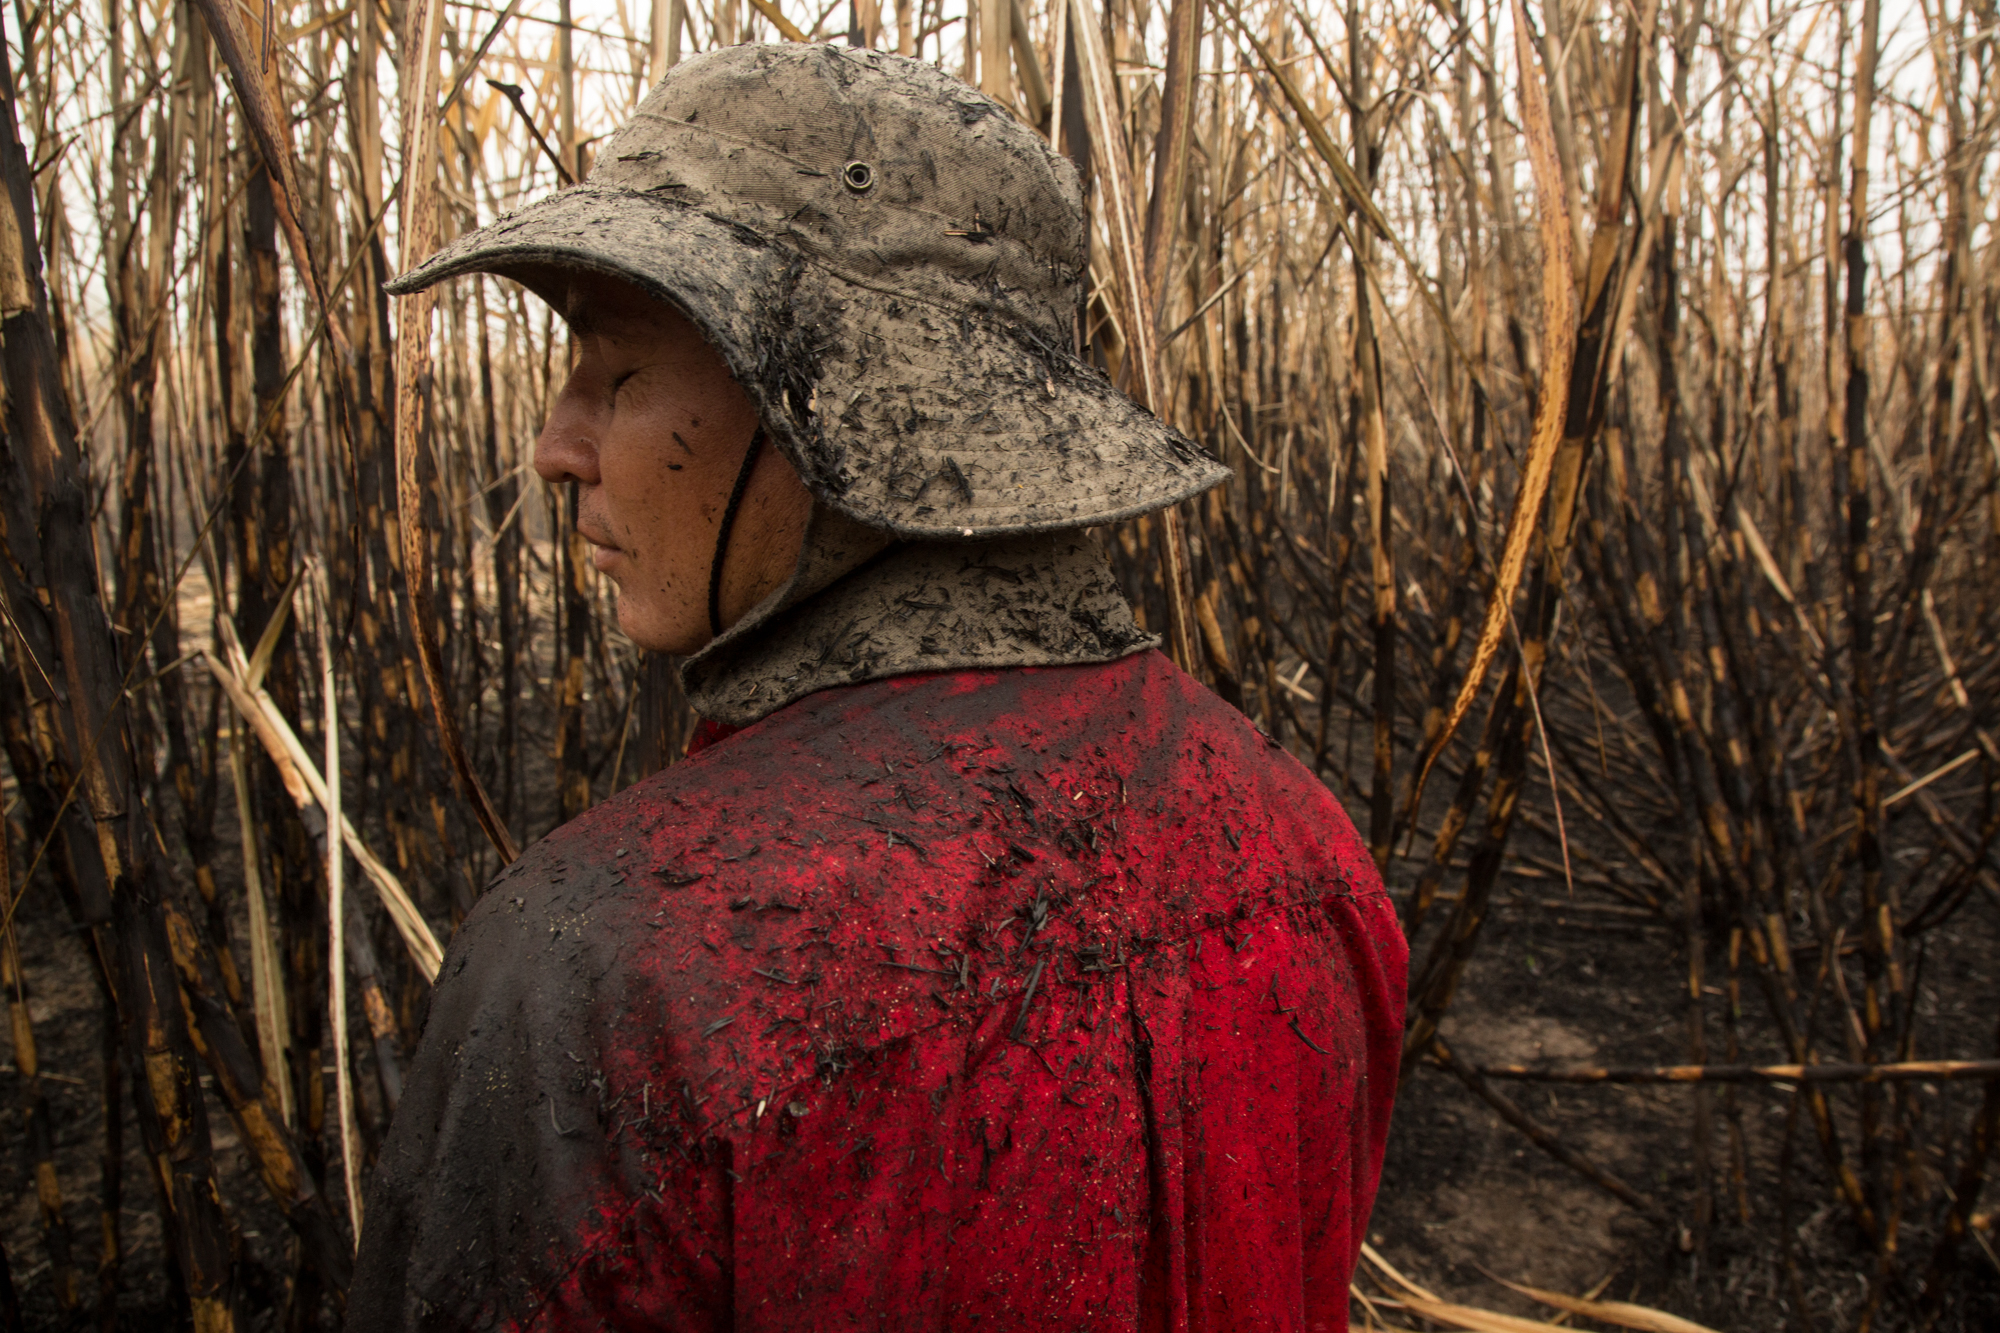  A sugarcane cutter near Los Almendros, El Salvador covered in soot and charred cane one early morning.&nbsp; 